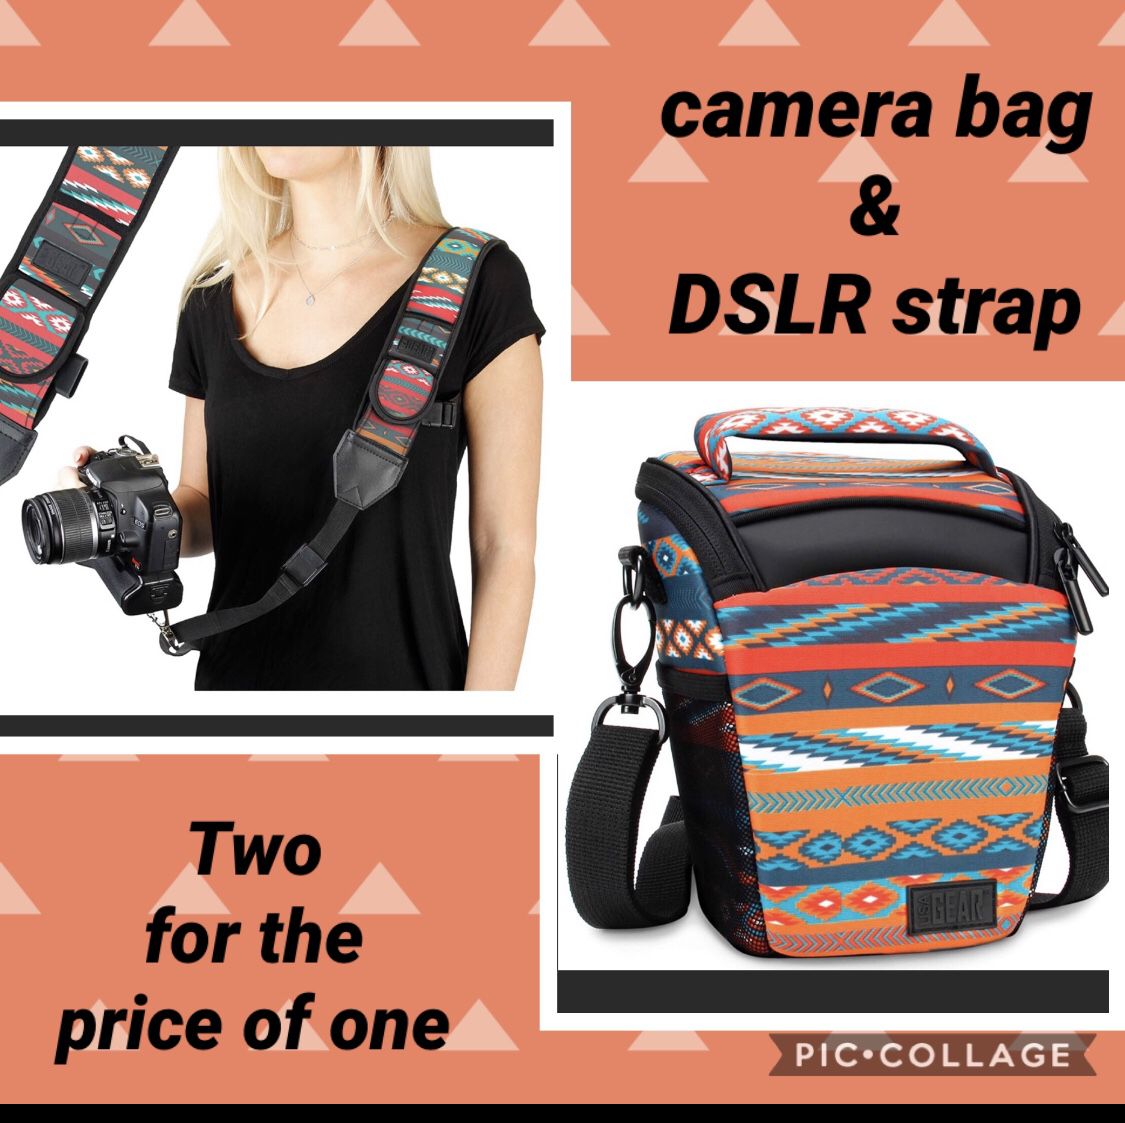 usa 🇺🇸 gear dslr Camera bag & free strap , Check out all my other equipment bundle up and always save more, please see pictures for full description